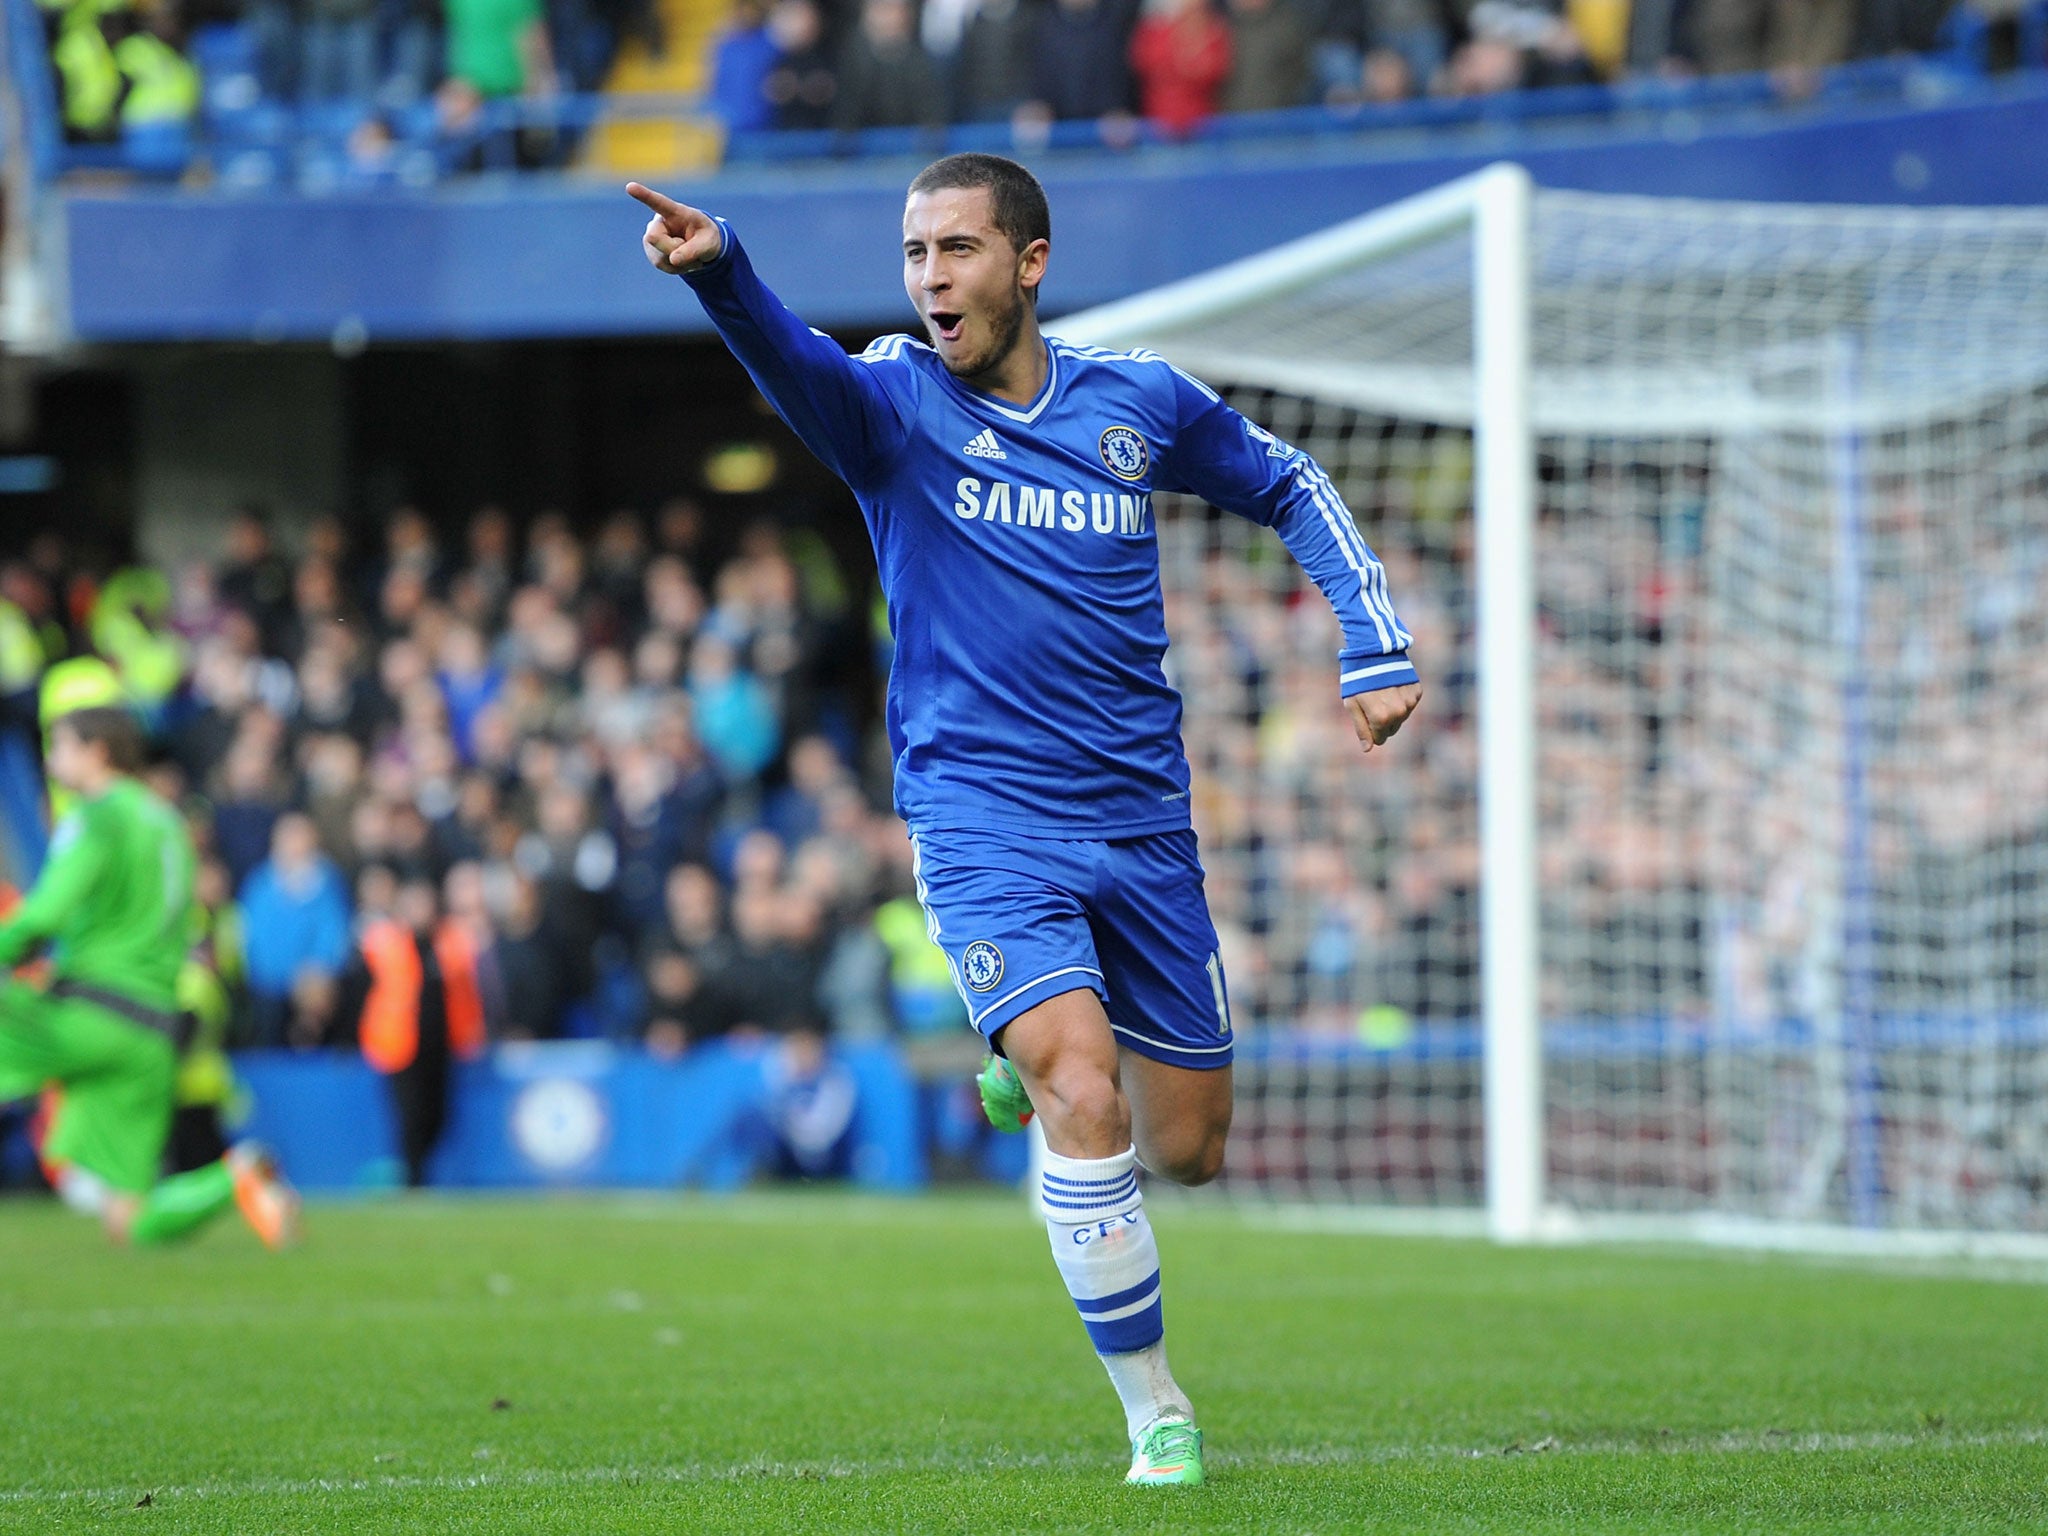 Eden Hazard was convinced to join Chelsea after Roman Abramovich offered to triple his LIlle wages, according to the French club's manager Rudi Garcia